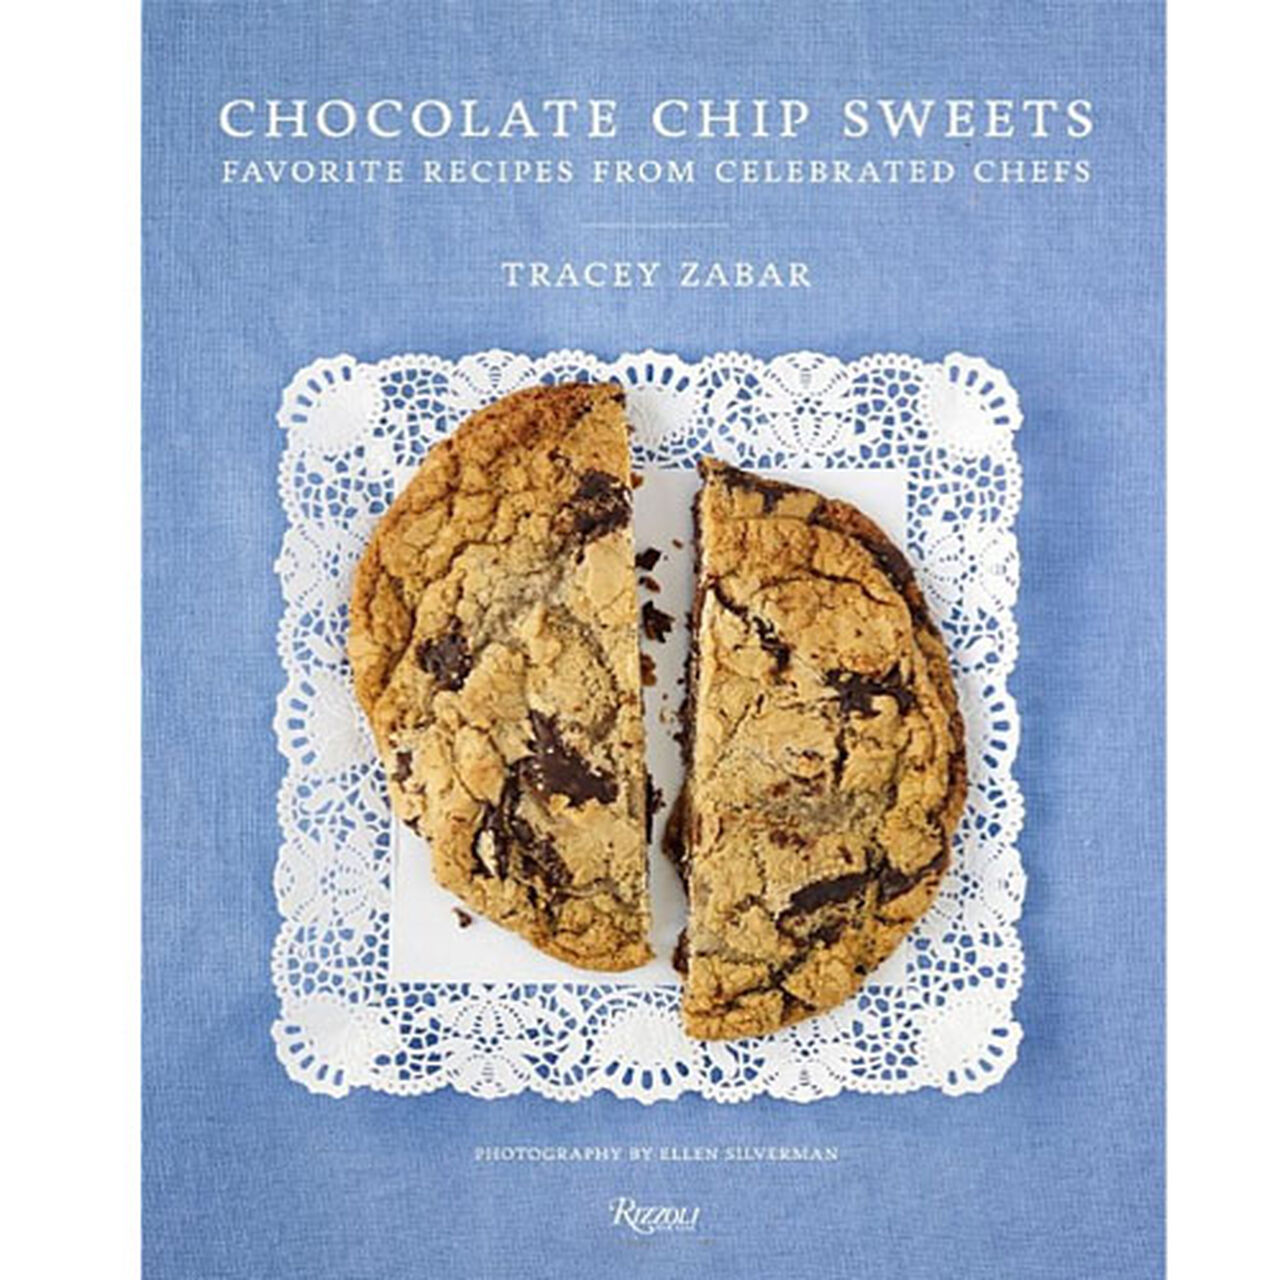 Chocolate Chip Sweets:Celebrated Chefs Share Favorite Recipes By Tracey Zabar - Author Signed Copy, , large image number 0